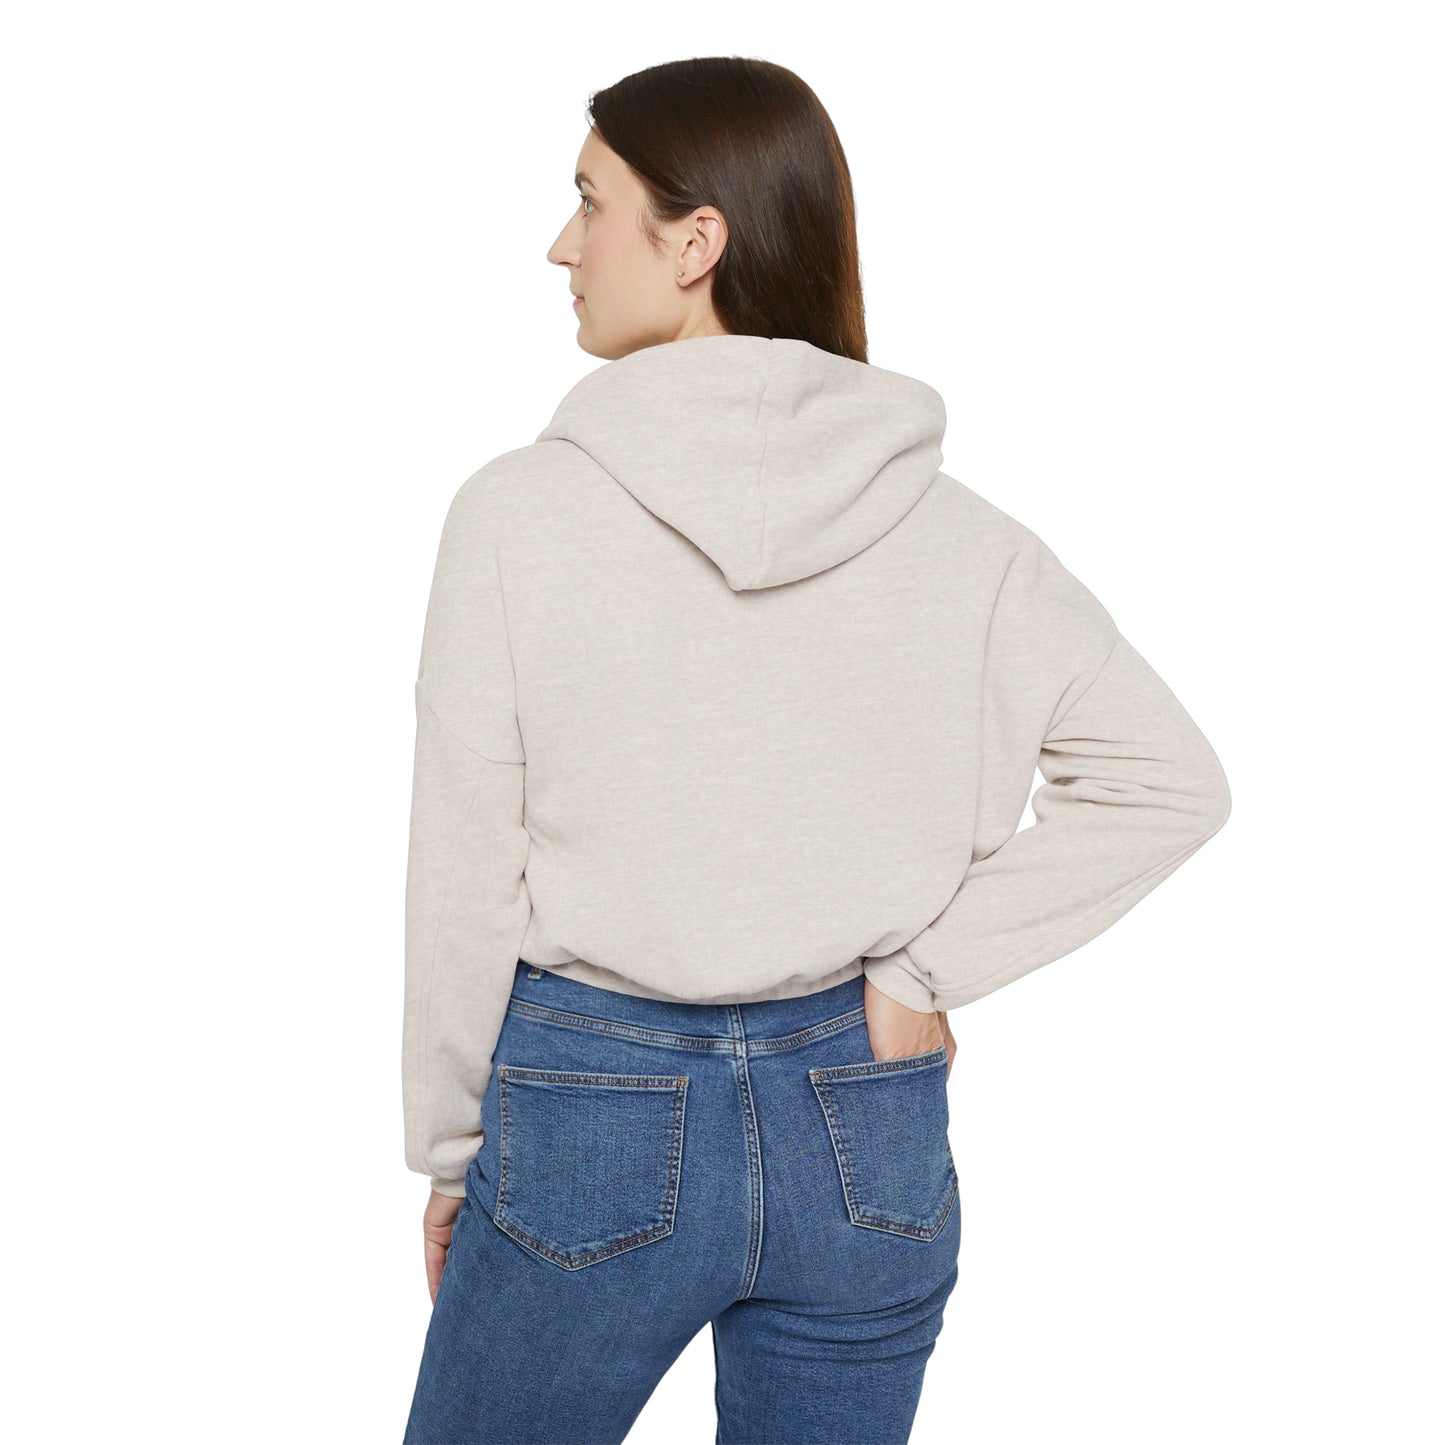 Cropped Better Together Hoodie